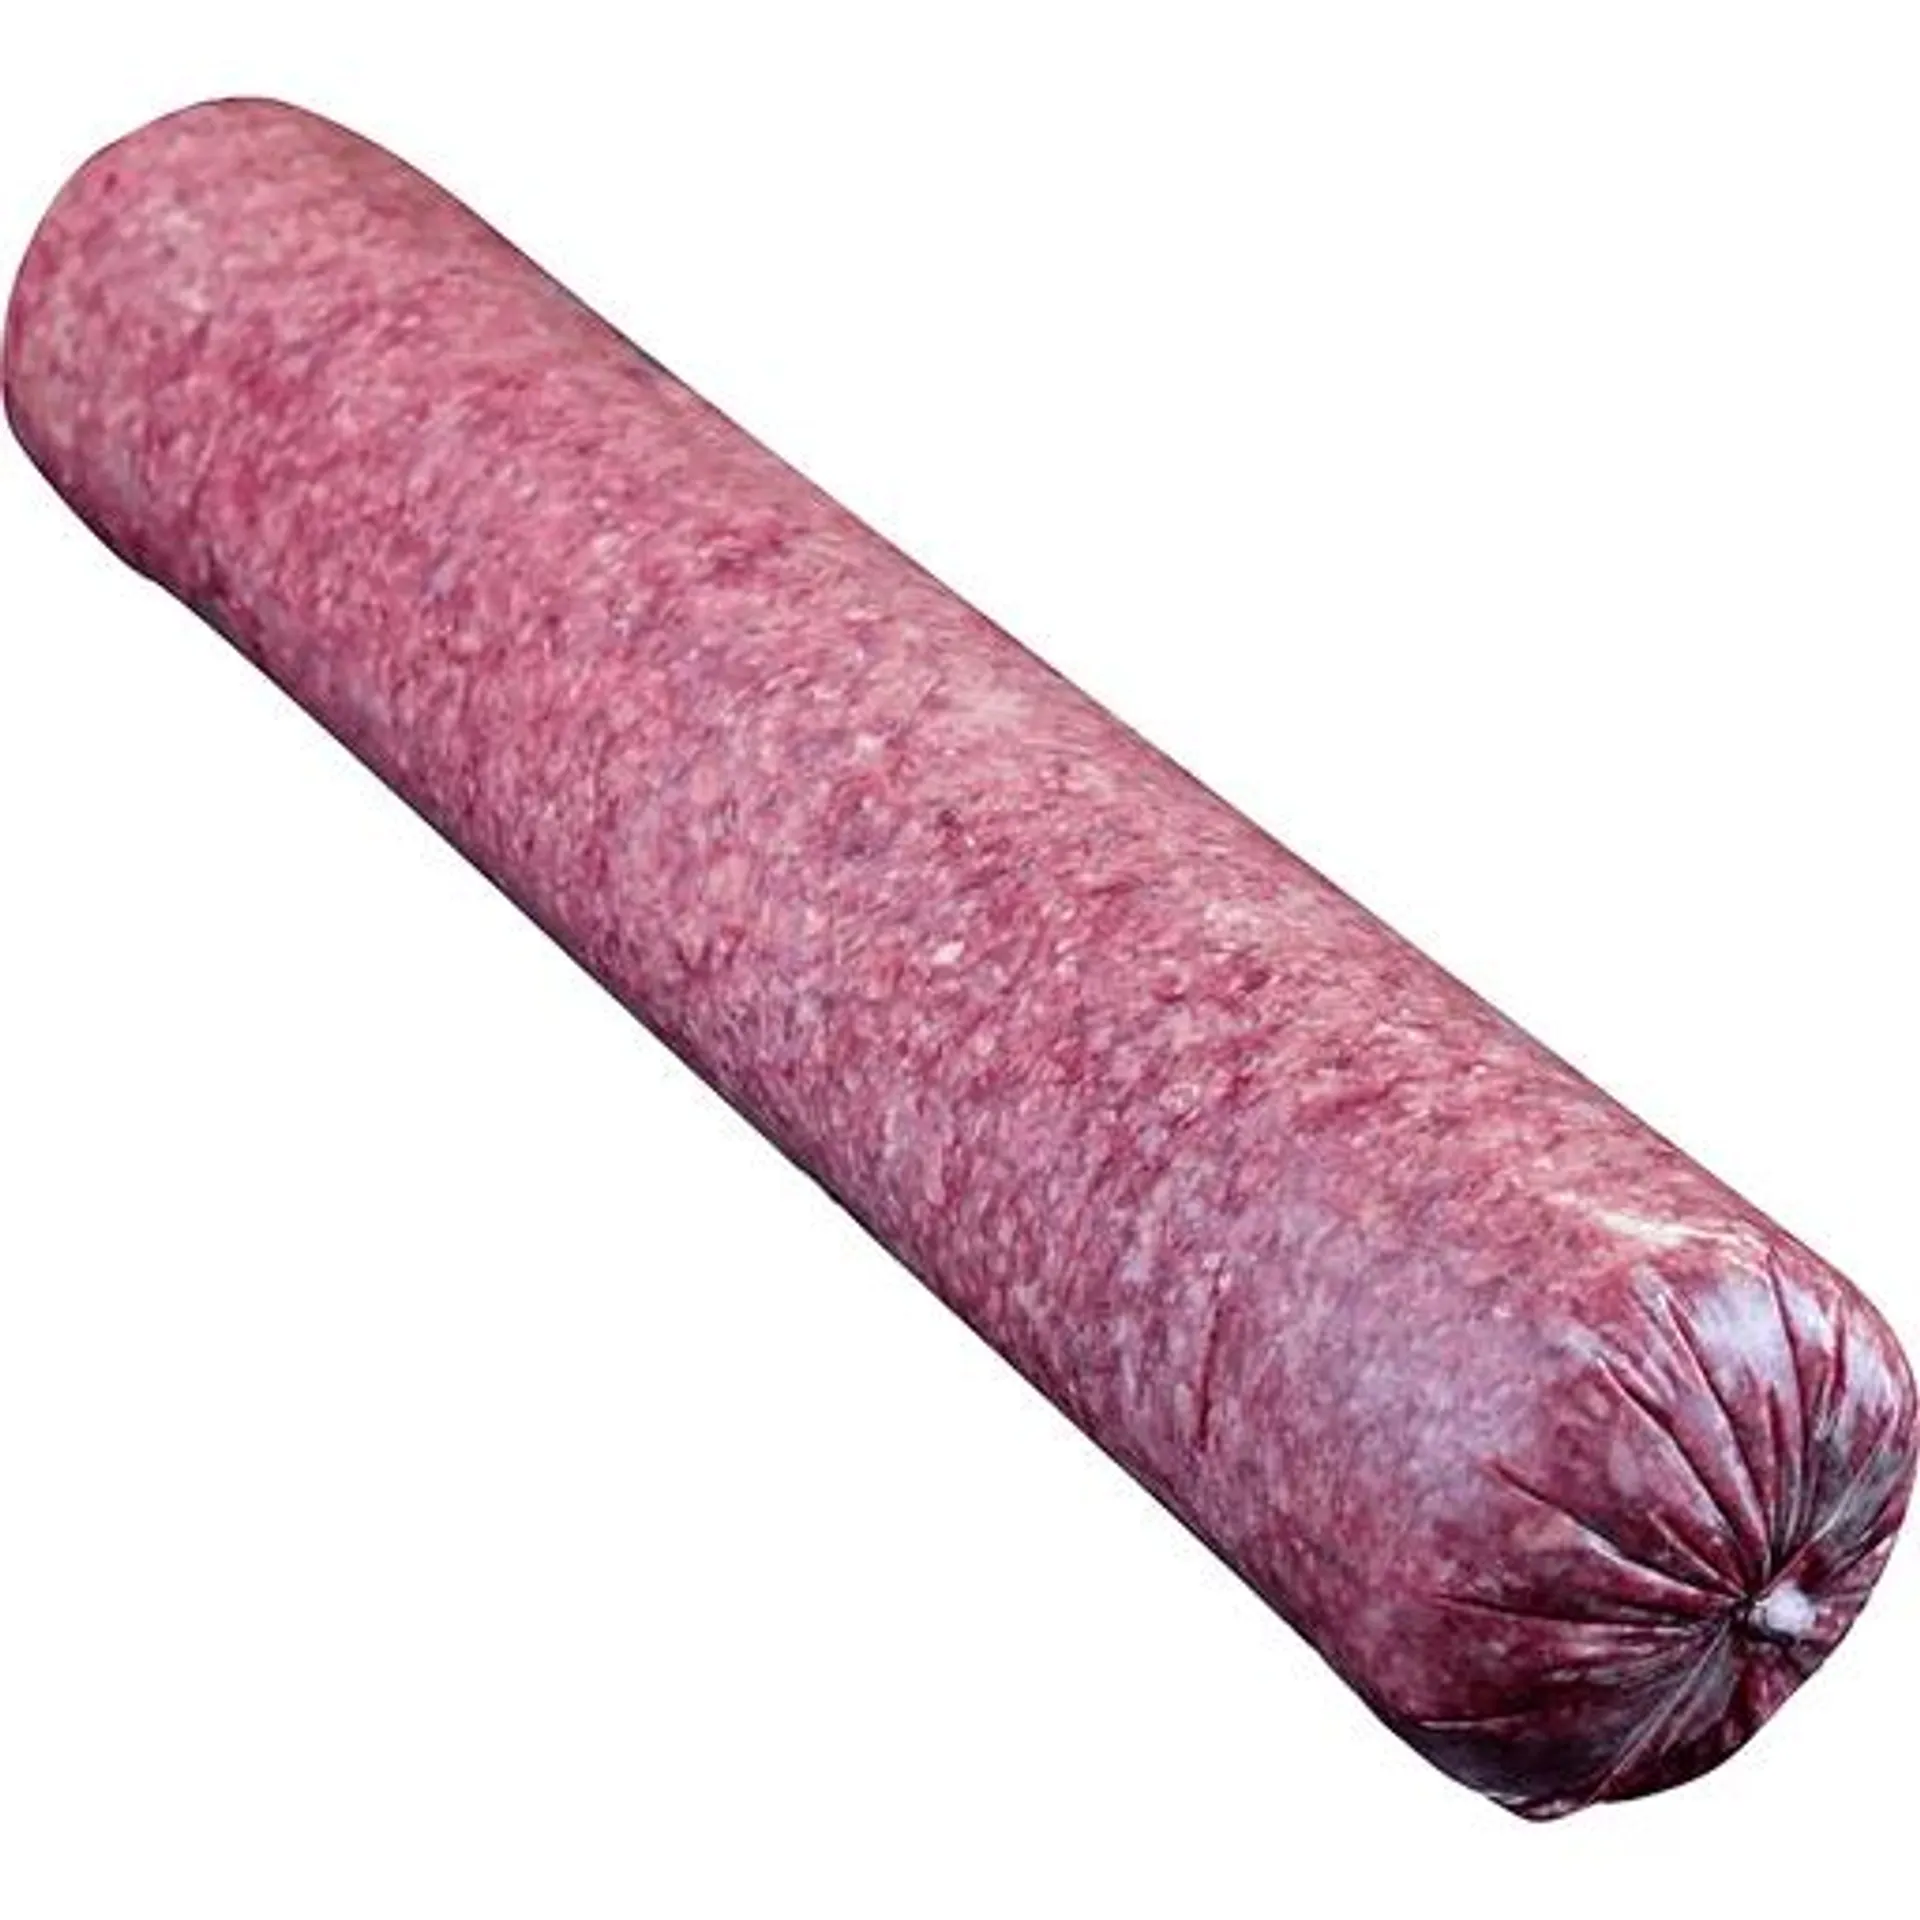 80%lean Ground Beef Tube